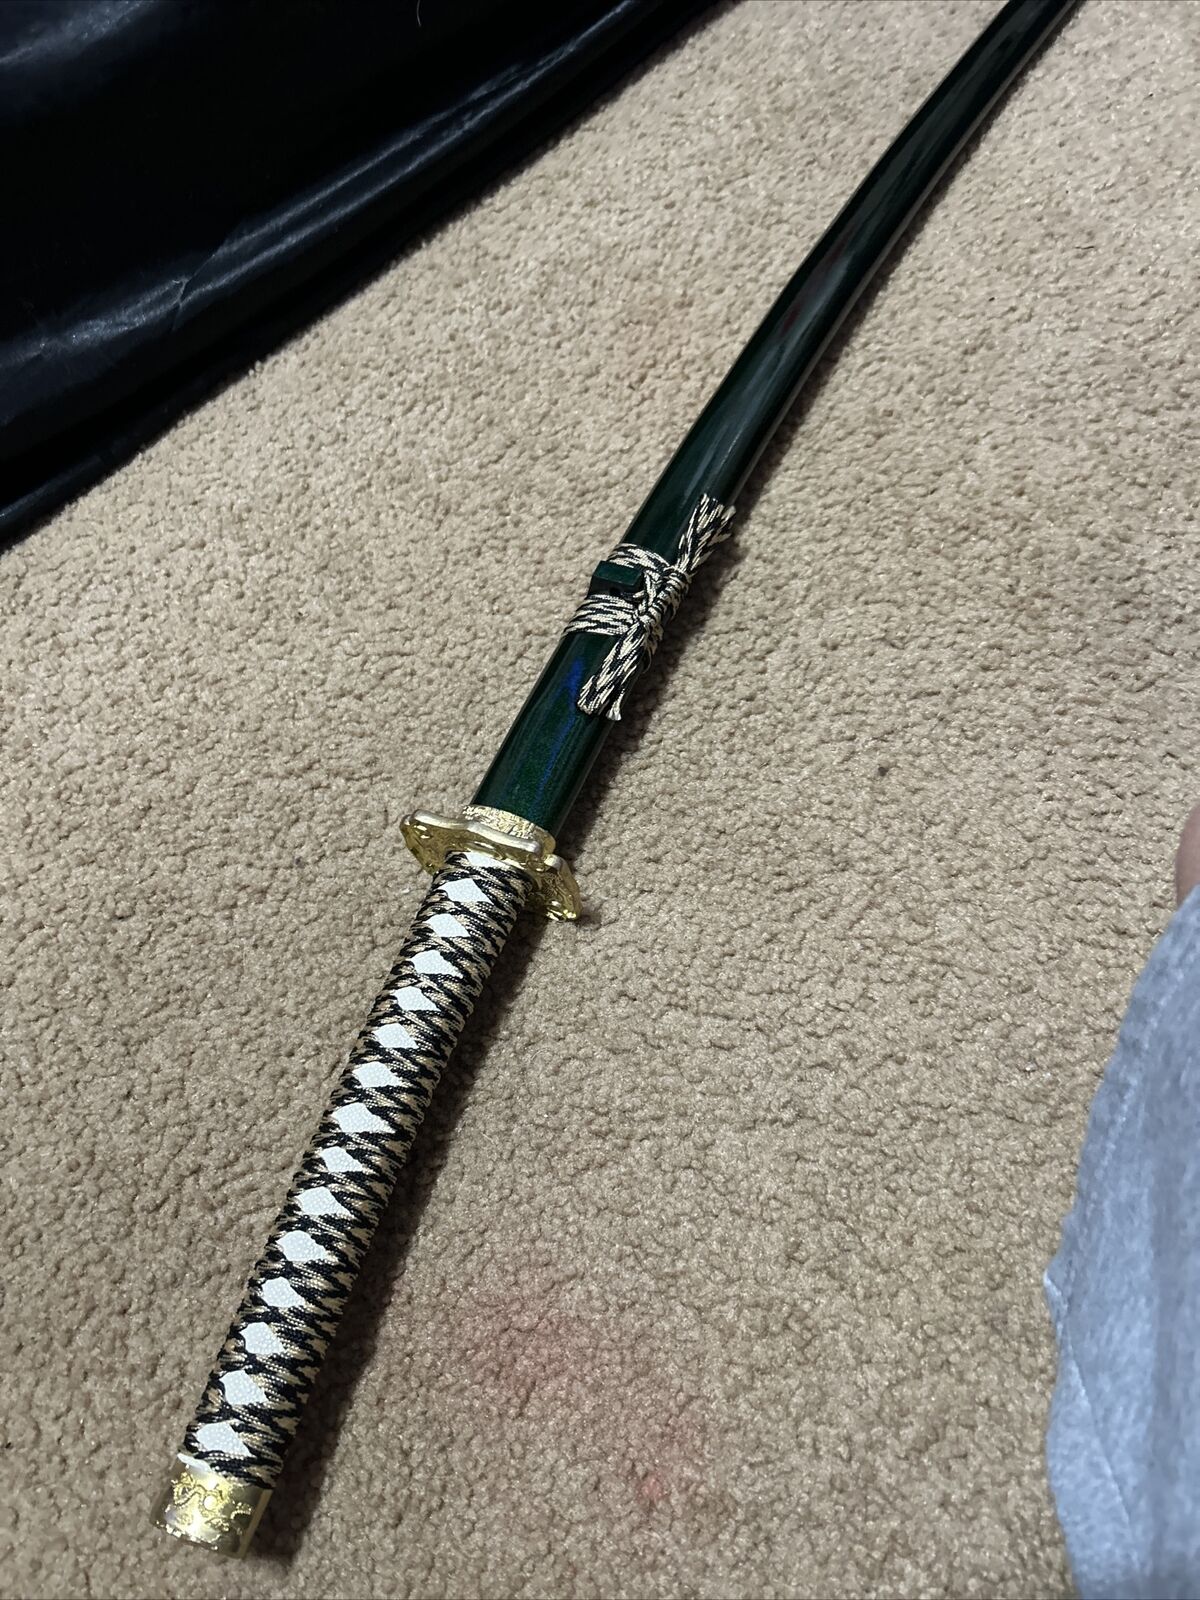 Emerald green, White leather handled sword